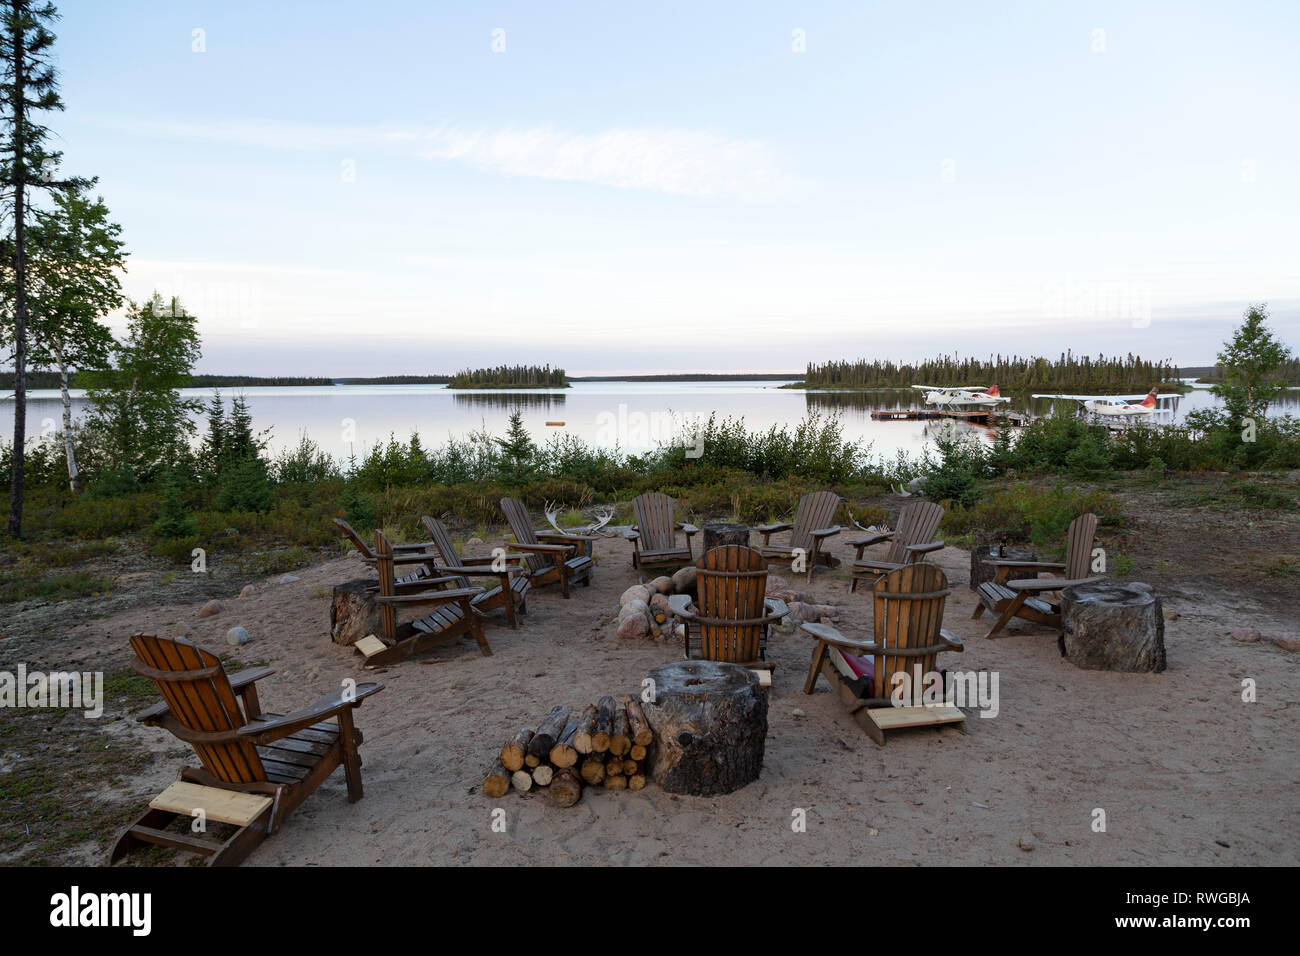 Seats around the campfire at Gangler's Lodge in Manitoba, Canada. The lodge opertaes fishing and adventure tours on the remote region. Stock Photo